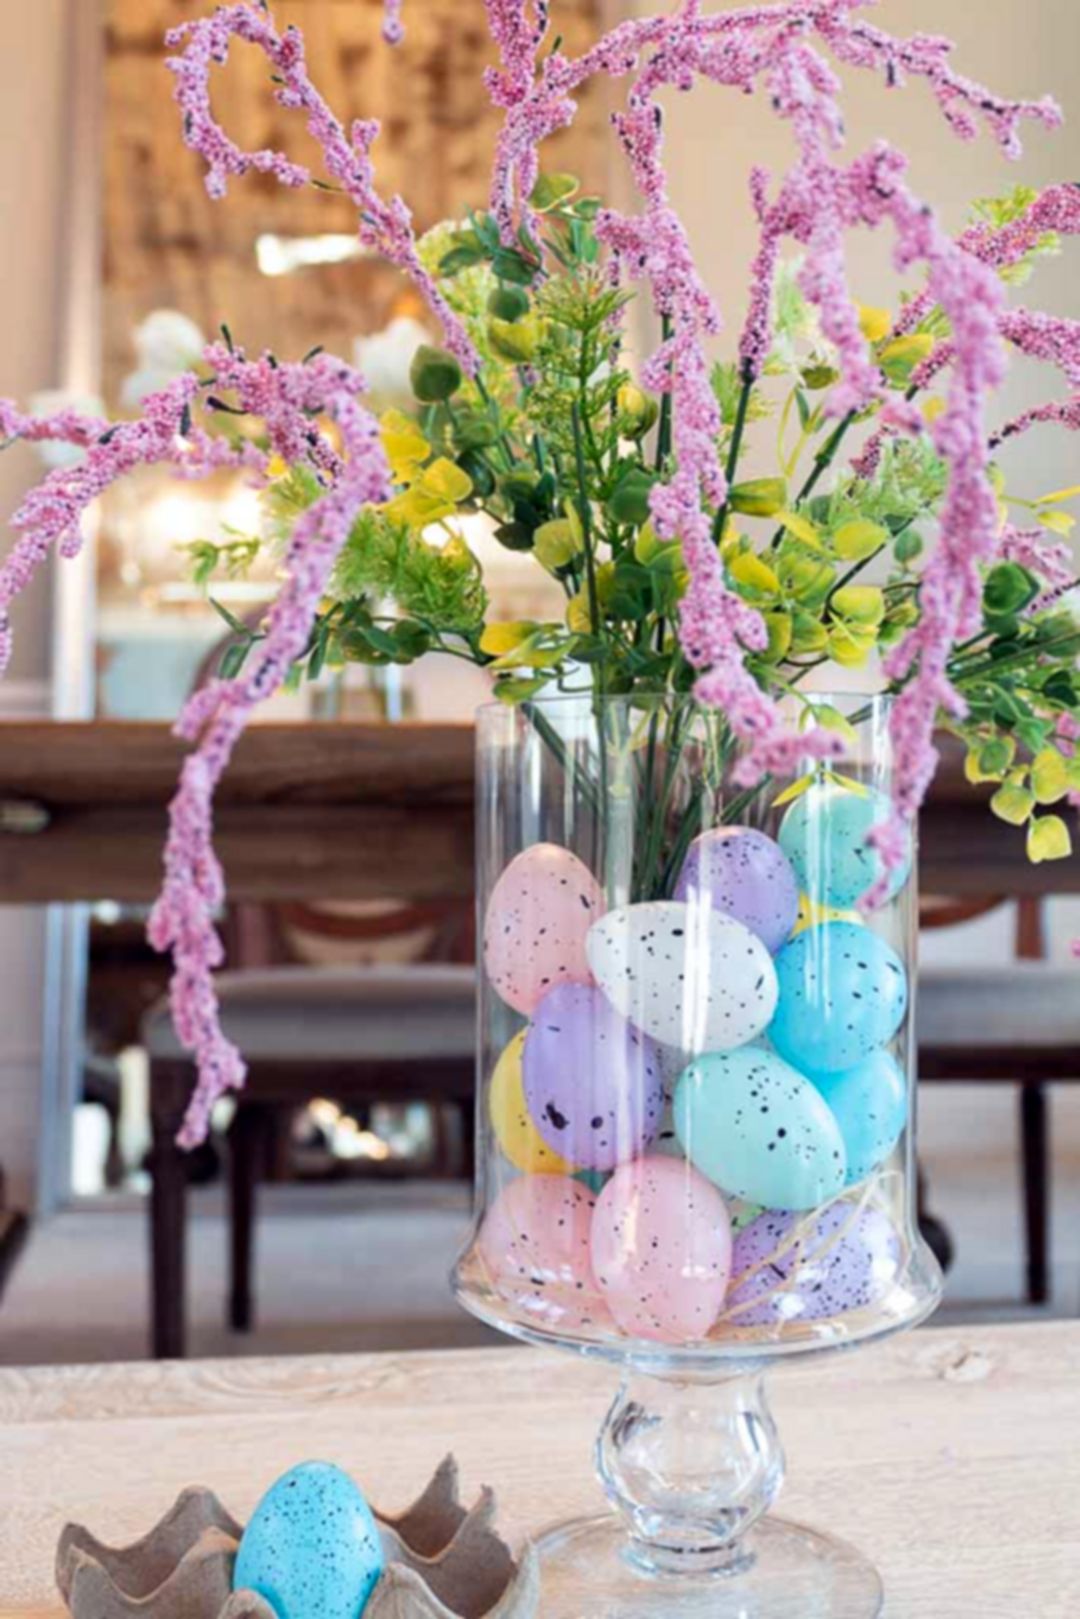 5 Wonderful DIY Easter Floral Arrangements To Beautify Your Home